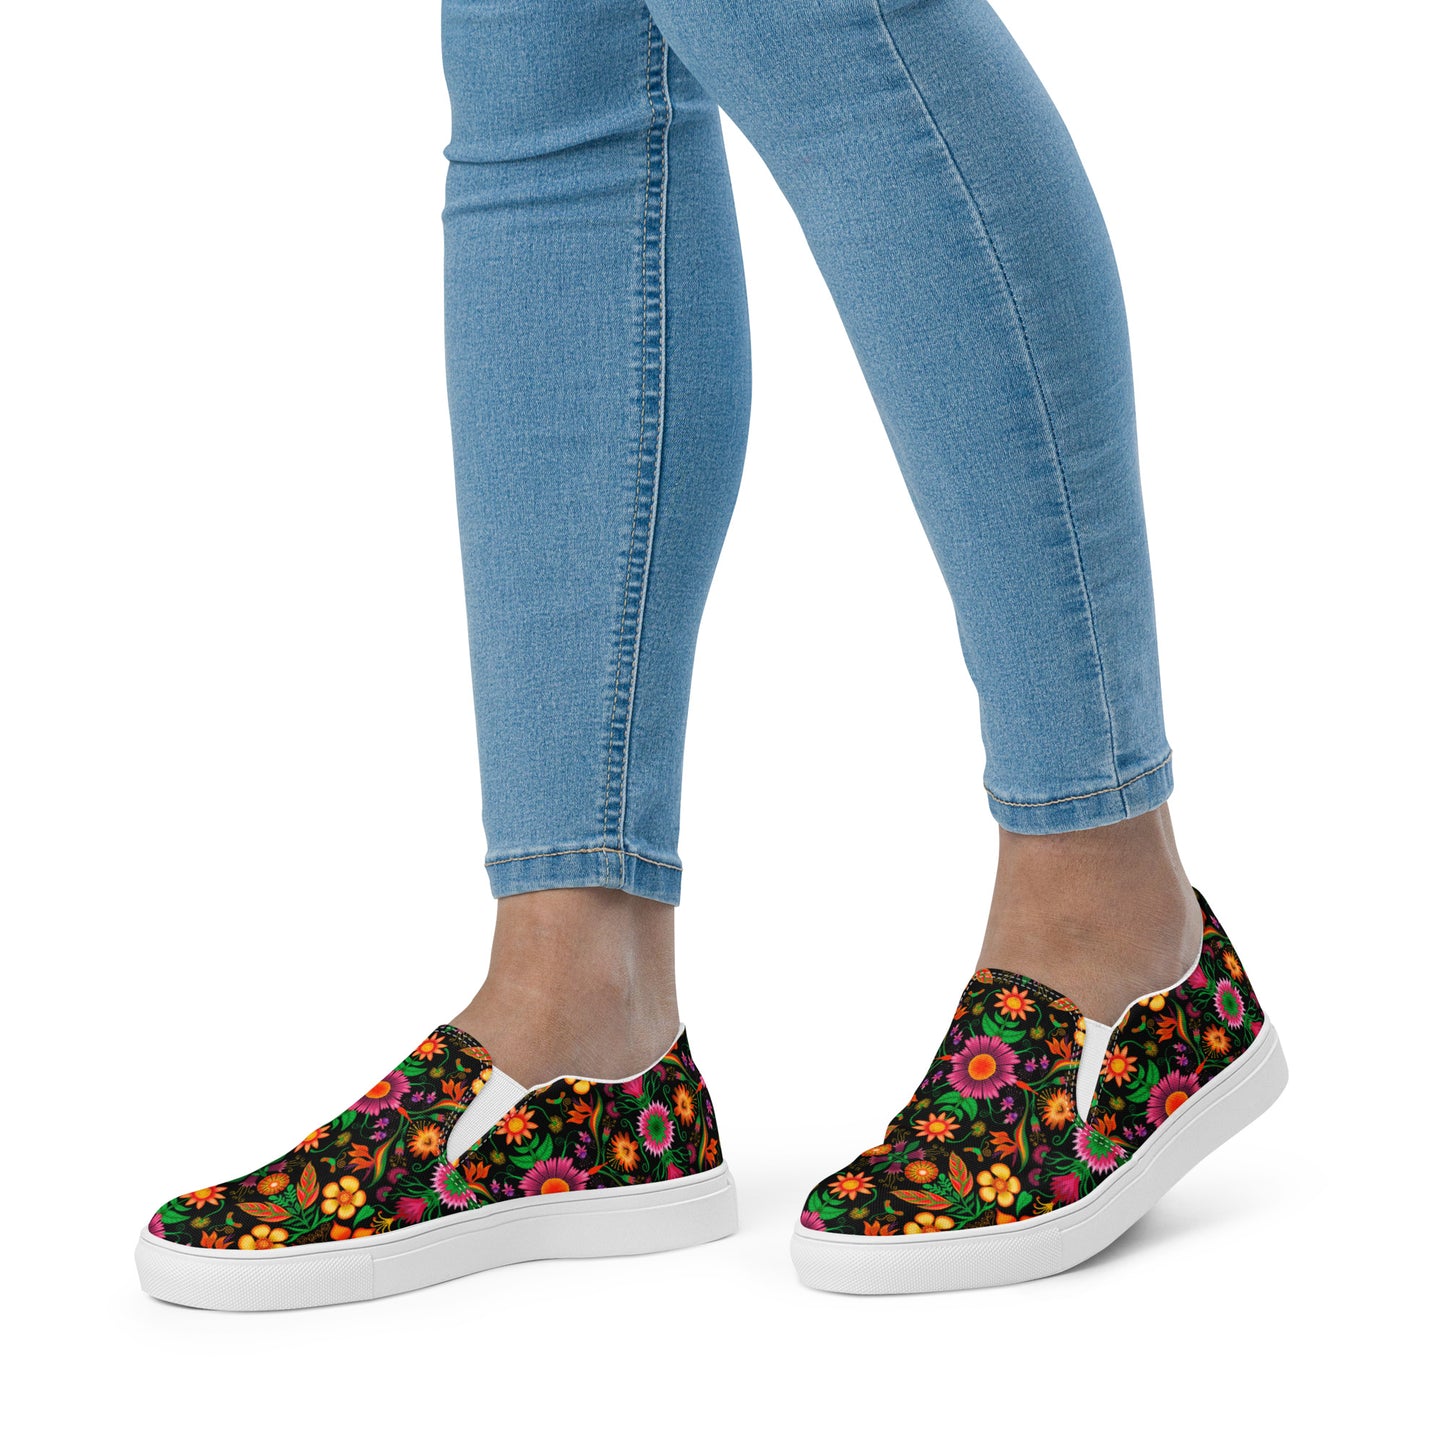 Wild flowers in a luxuriant jungle Women’s slip-on canvas shoes. Lifestyle